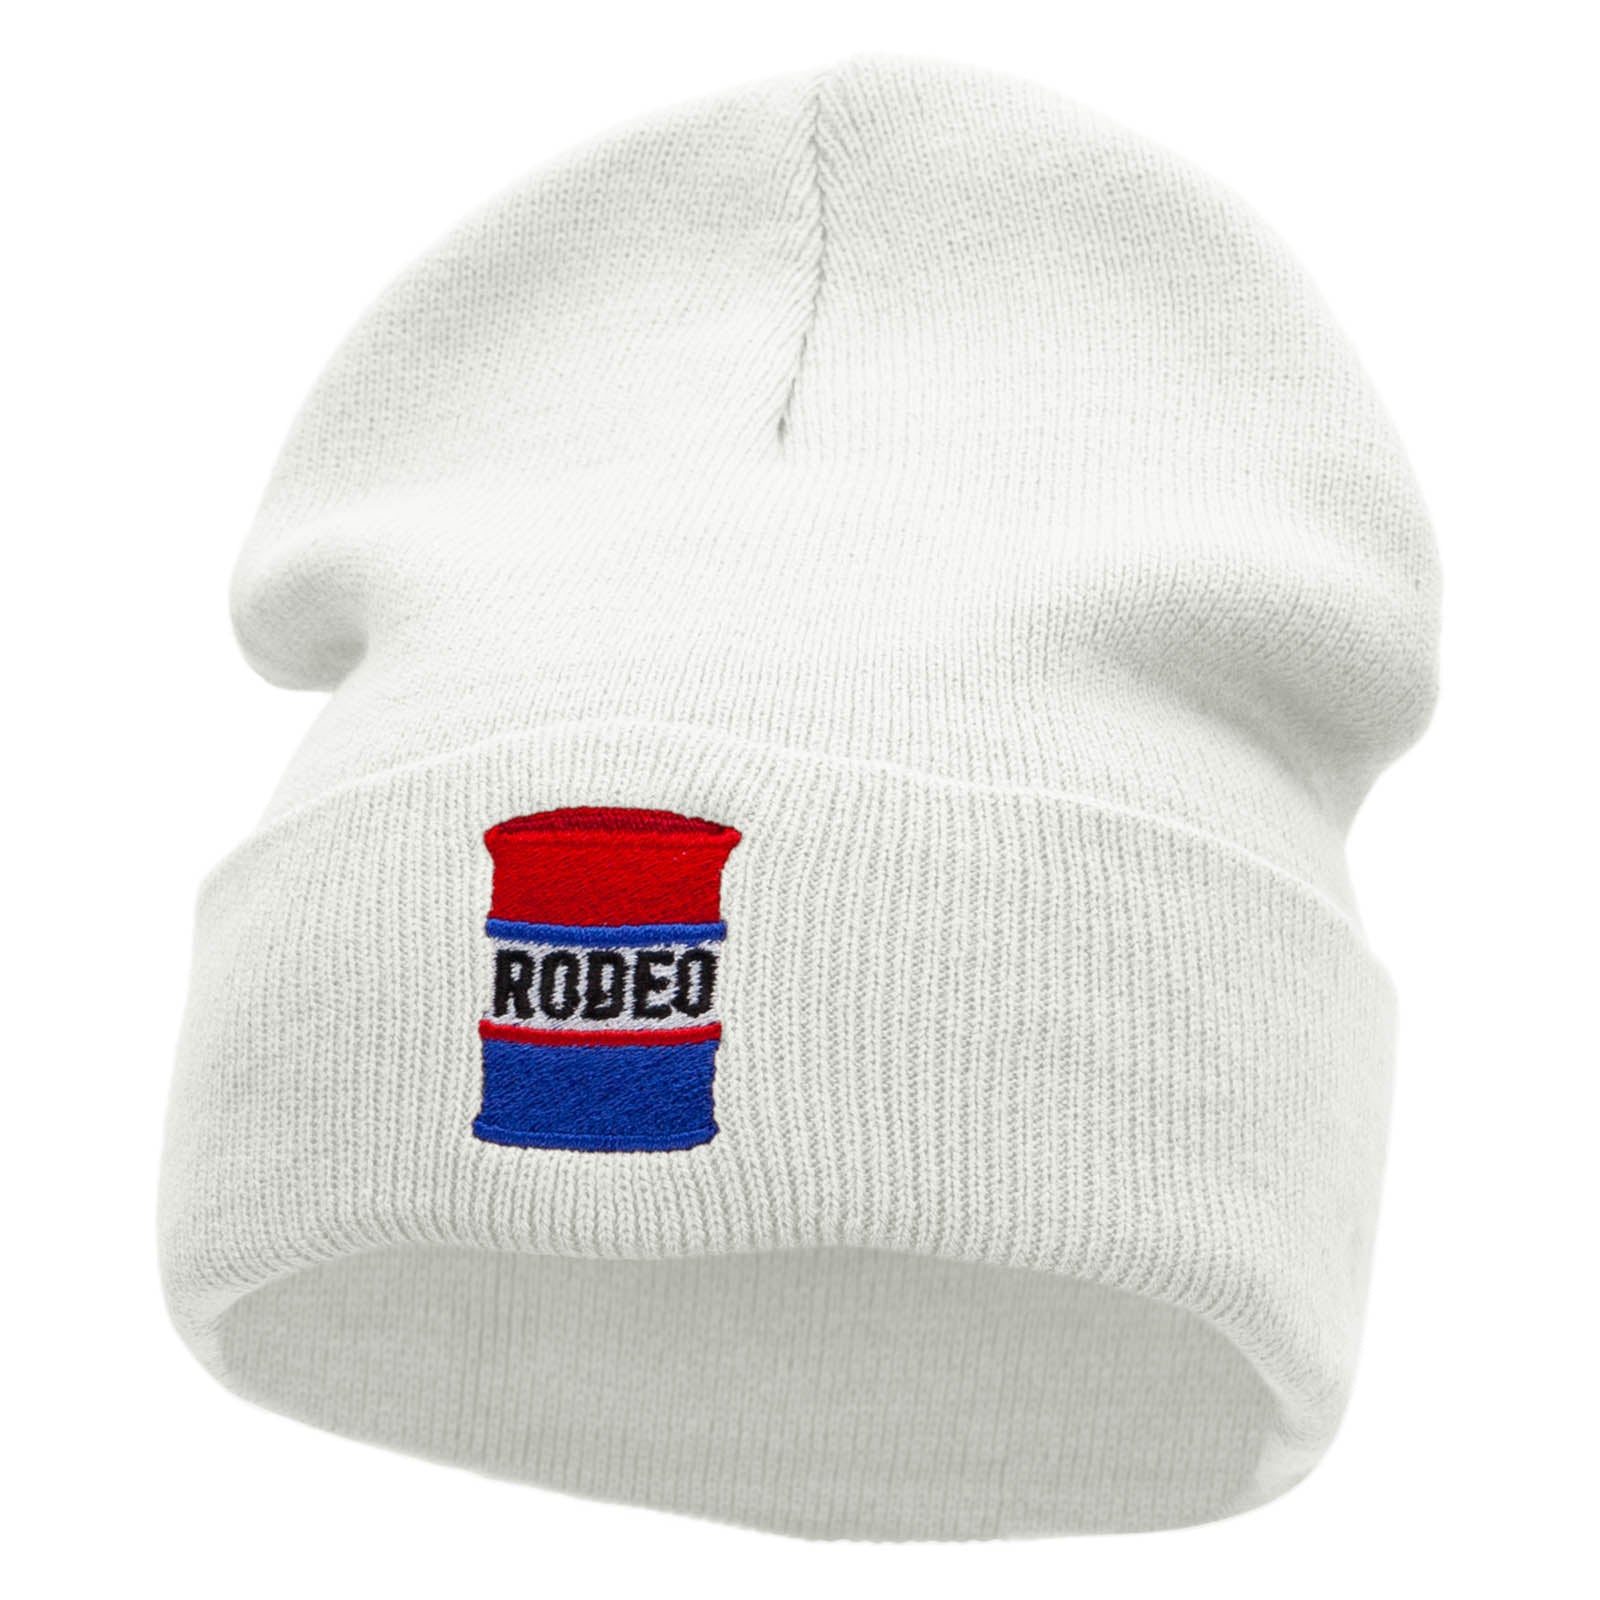 Rodeo Barrel  Symbol Embroidered 12 inch Acrylic Cuffed Long Beanie - White OSFM